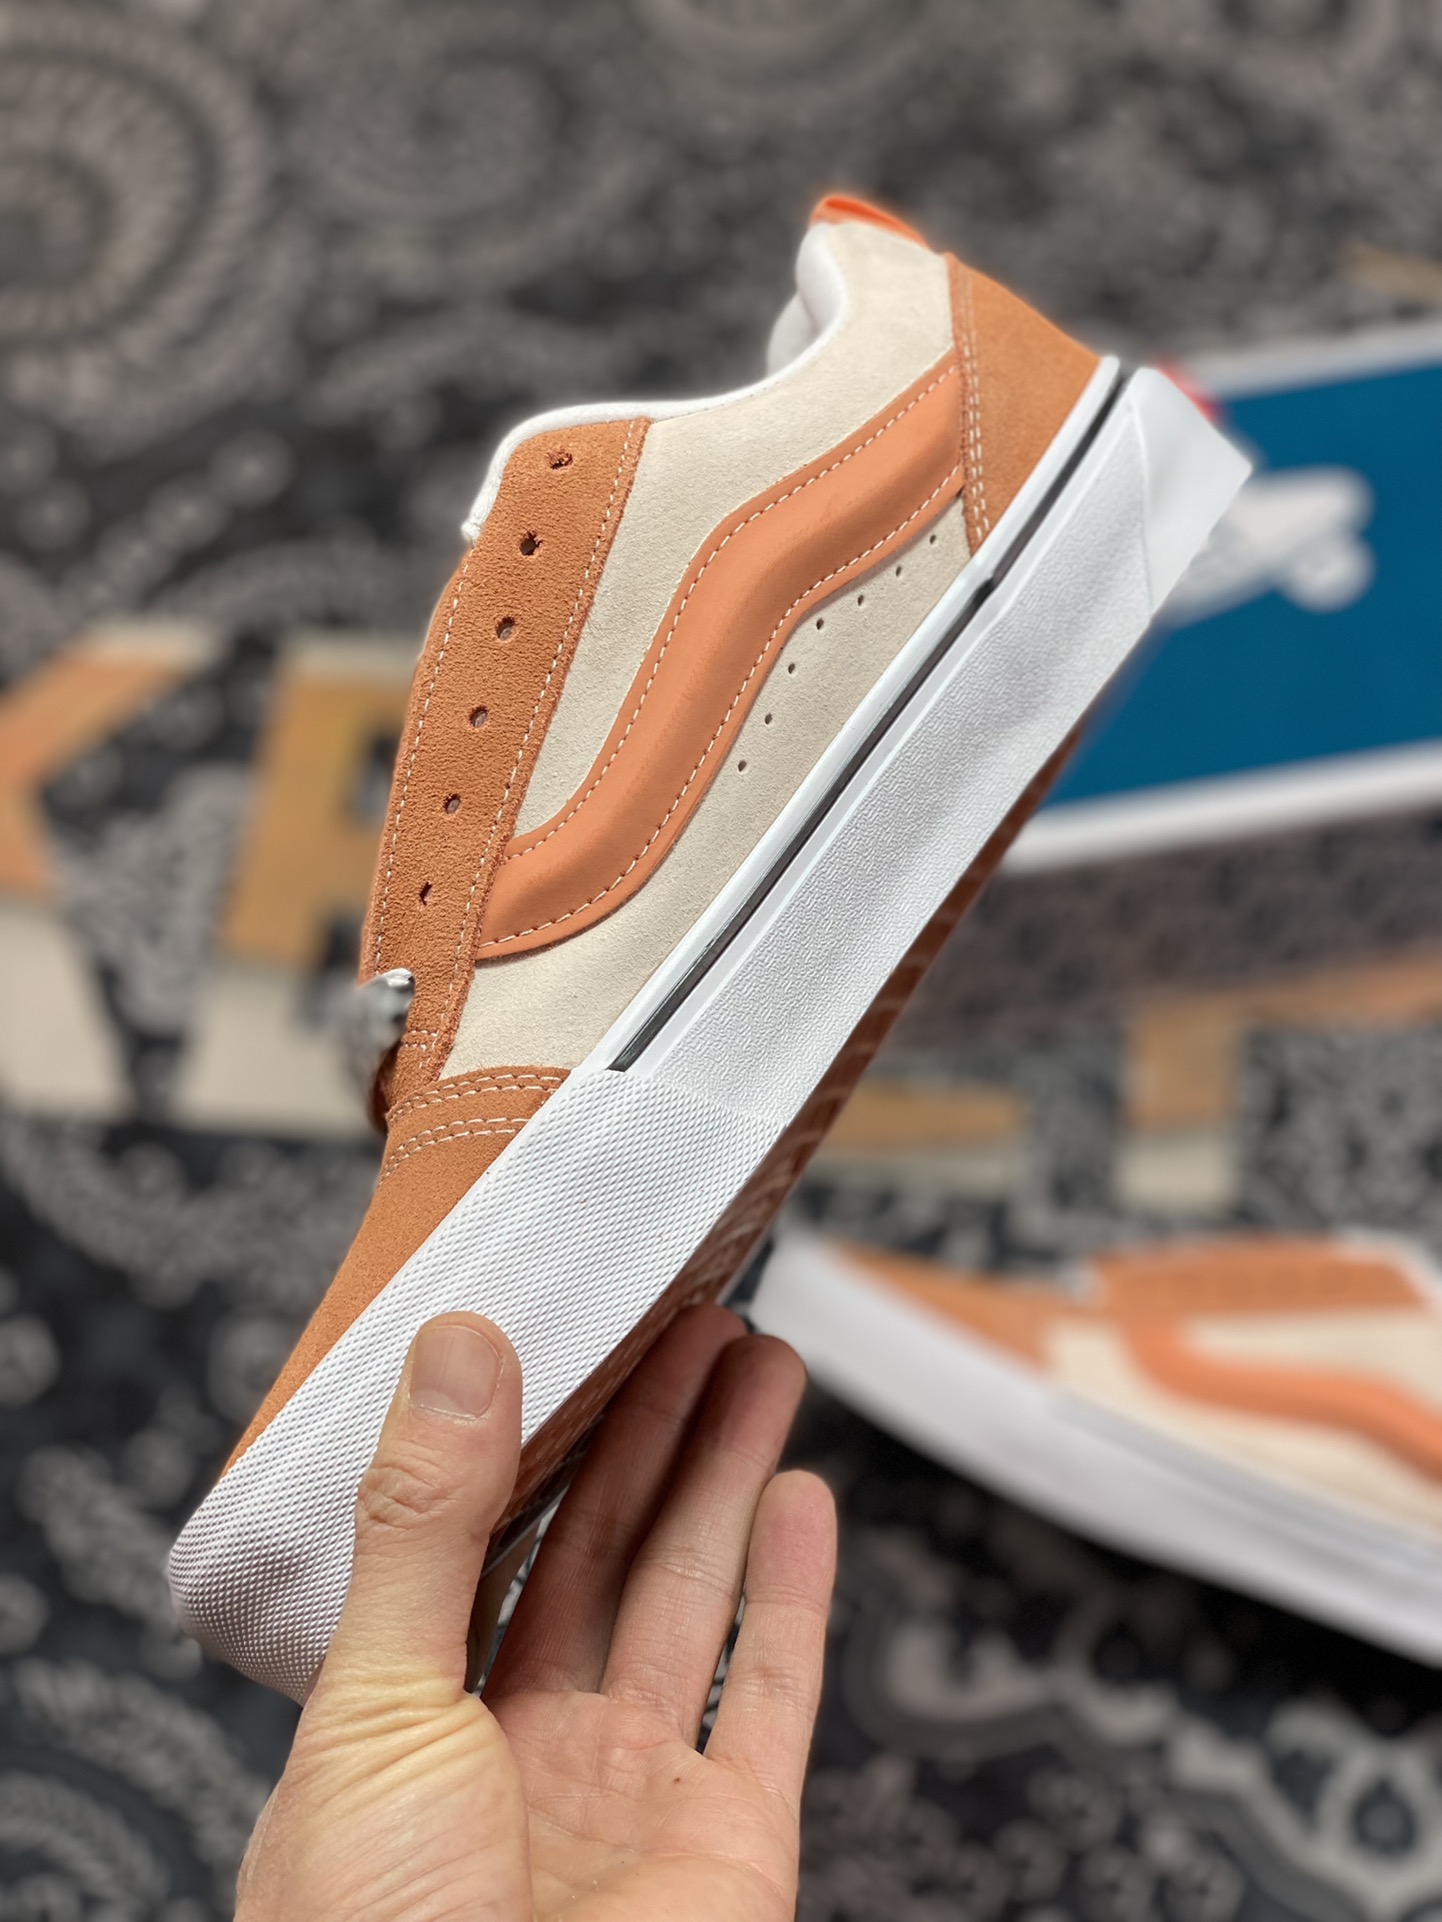 Vans Knu Skool Orange Bread Shoes. Here’s the opportunity to buy Bread Shoes again.